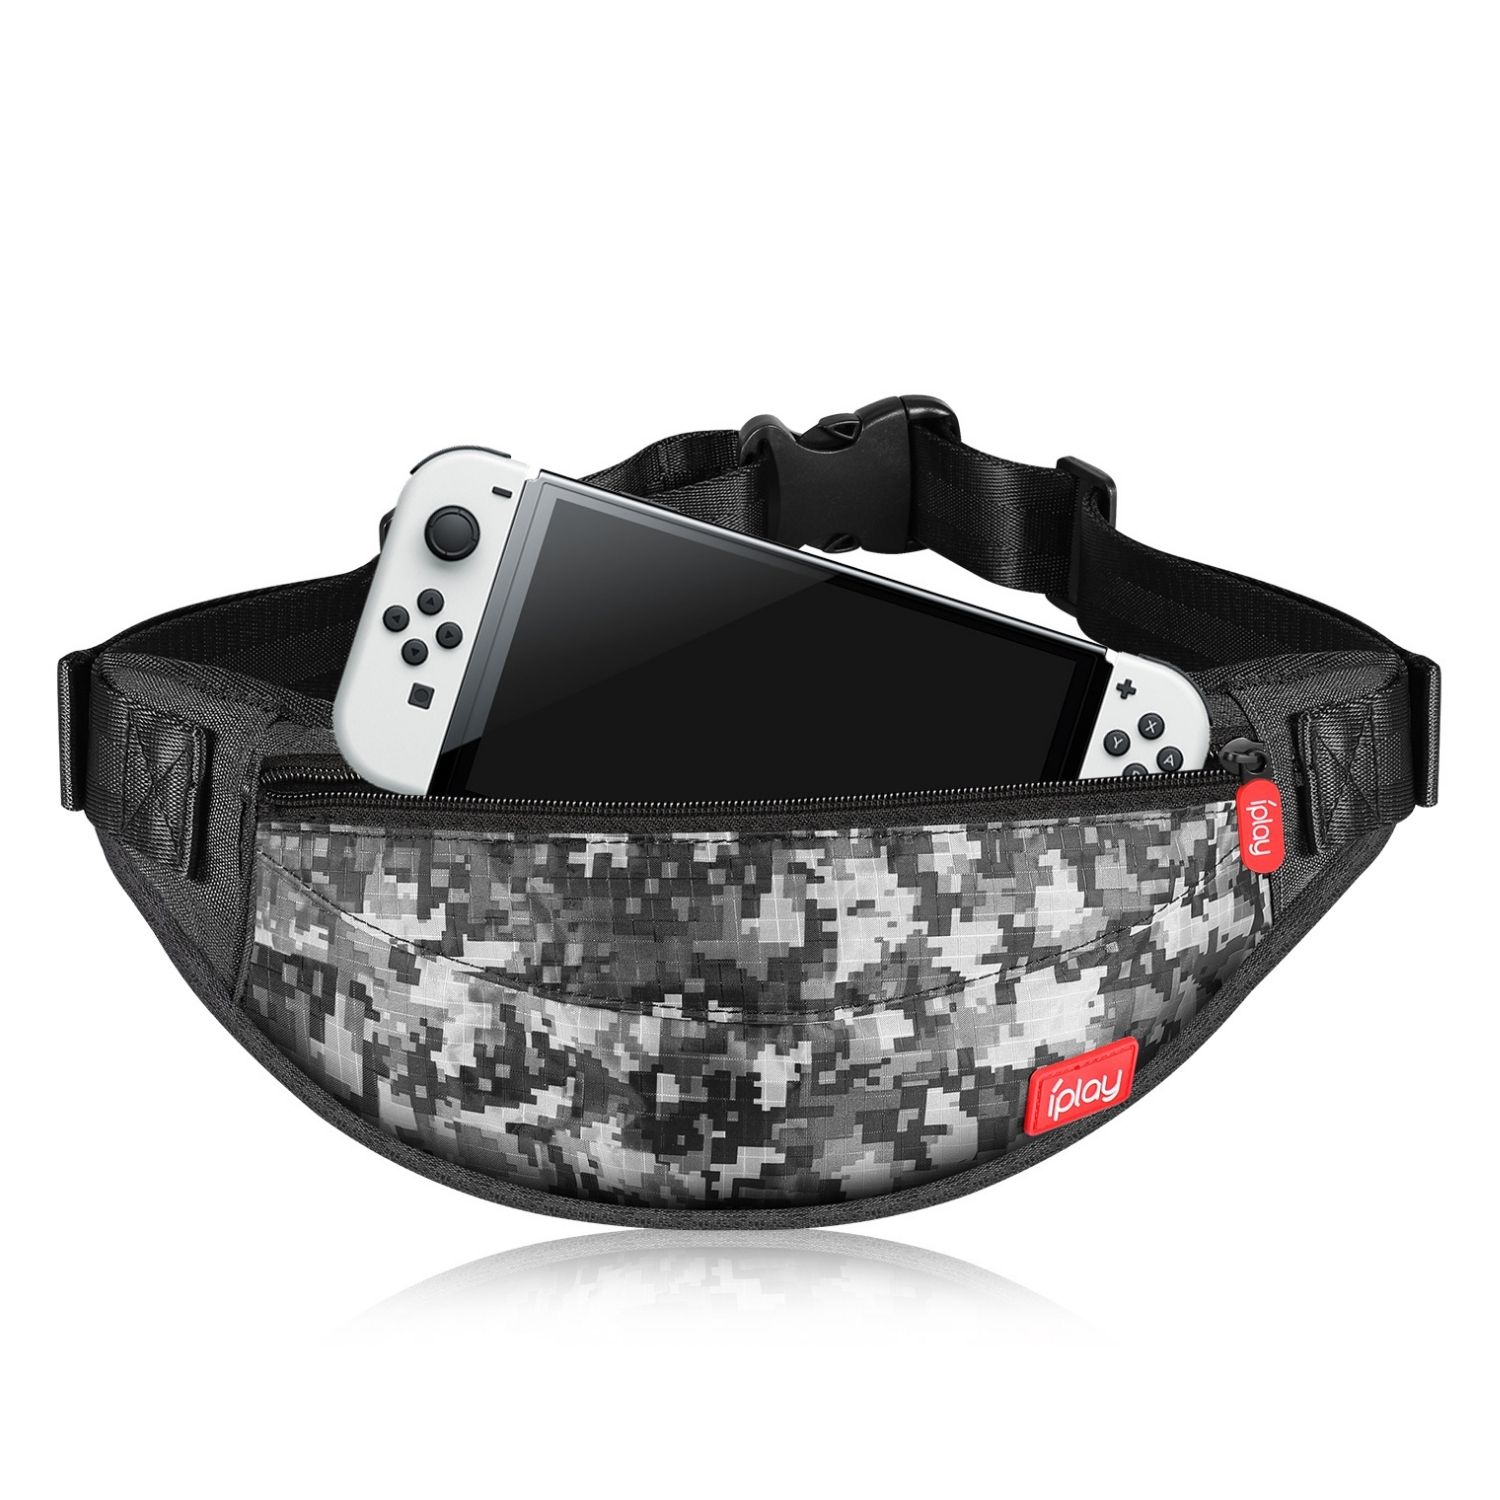 Switch Travel Bag for Nintendo Switch / Switch OLED / Switch Lite White Grey Digital Camo Fanny Pack Around The Waist Bag Carrying Hip Pouch for Console, Dock, Joy Cons, Cables and Accessories